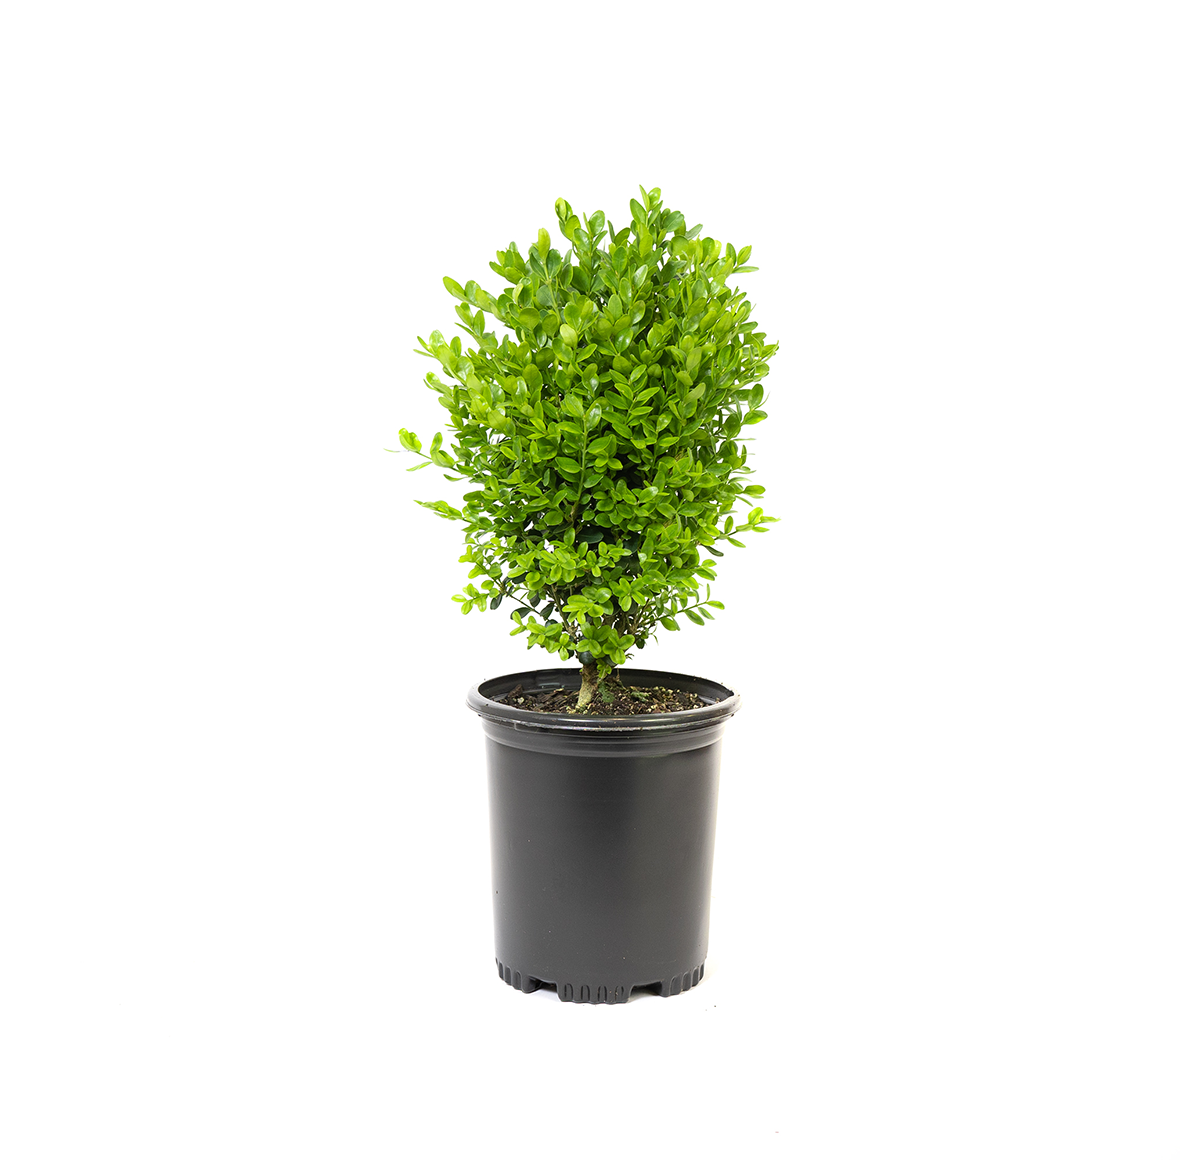 Dwarf English Boxwood in a black nursery container